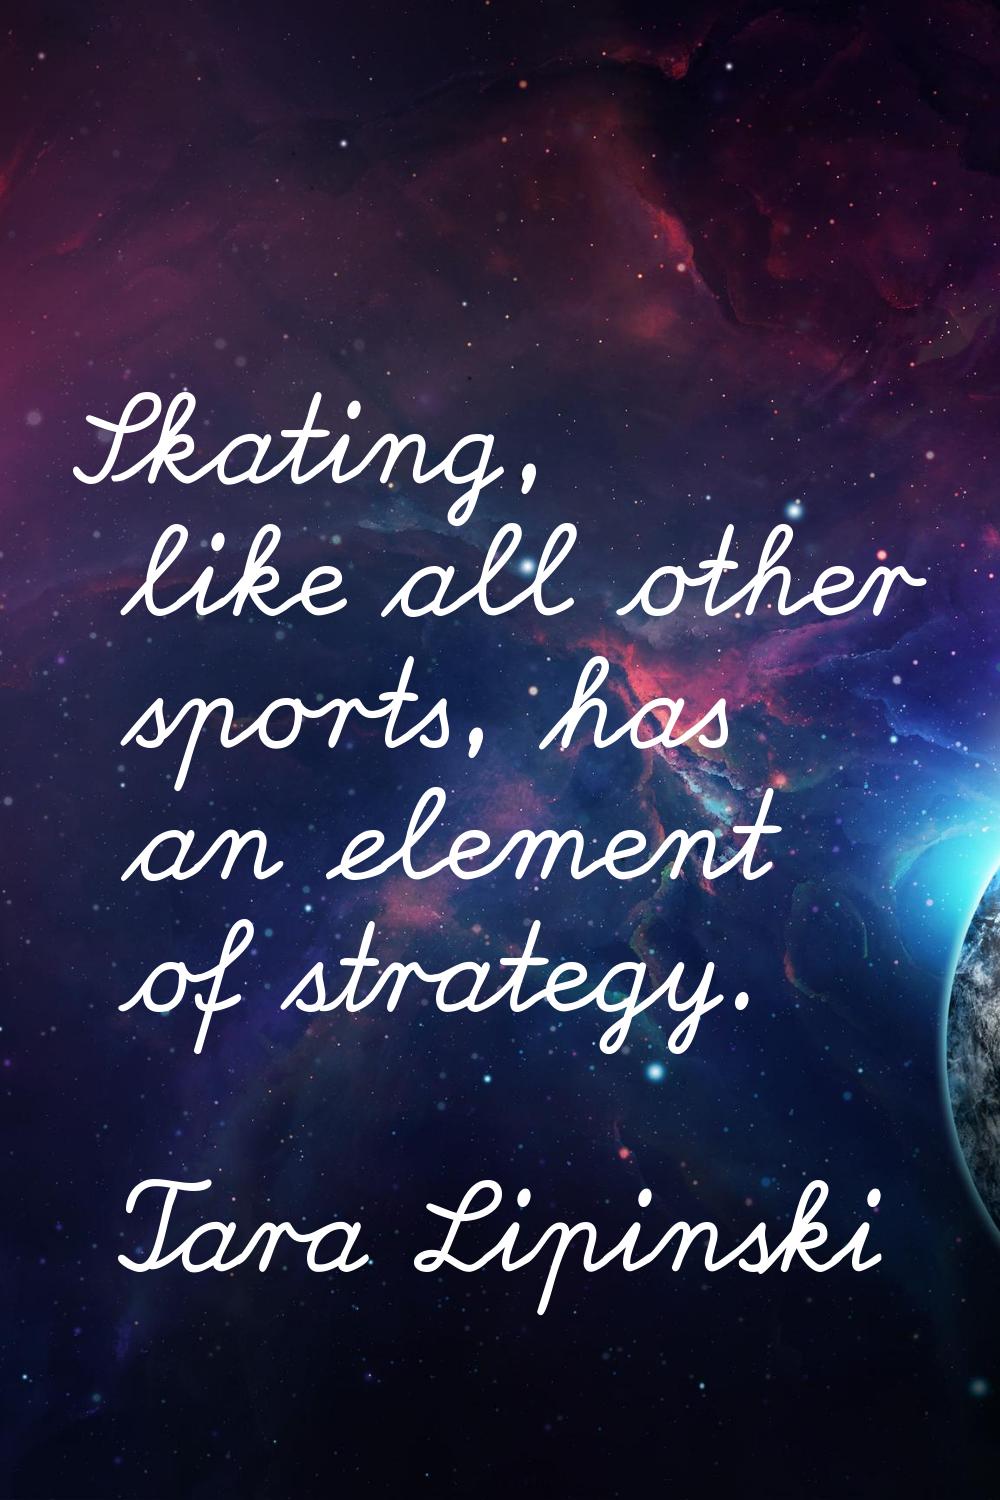 Skating, like all other sports, has an element of strategy.